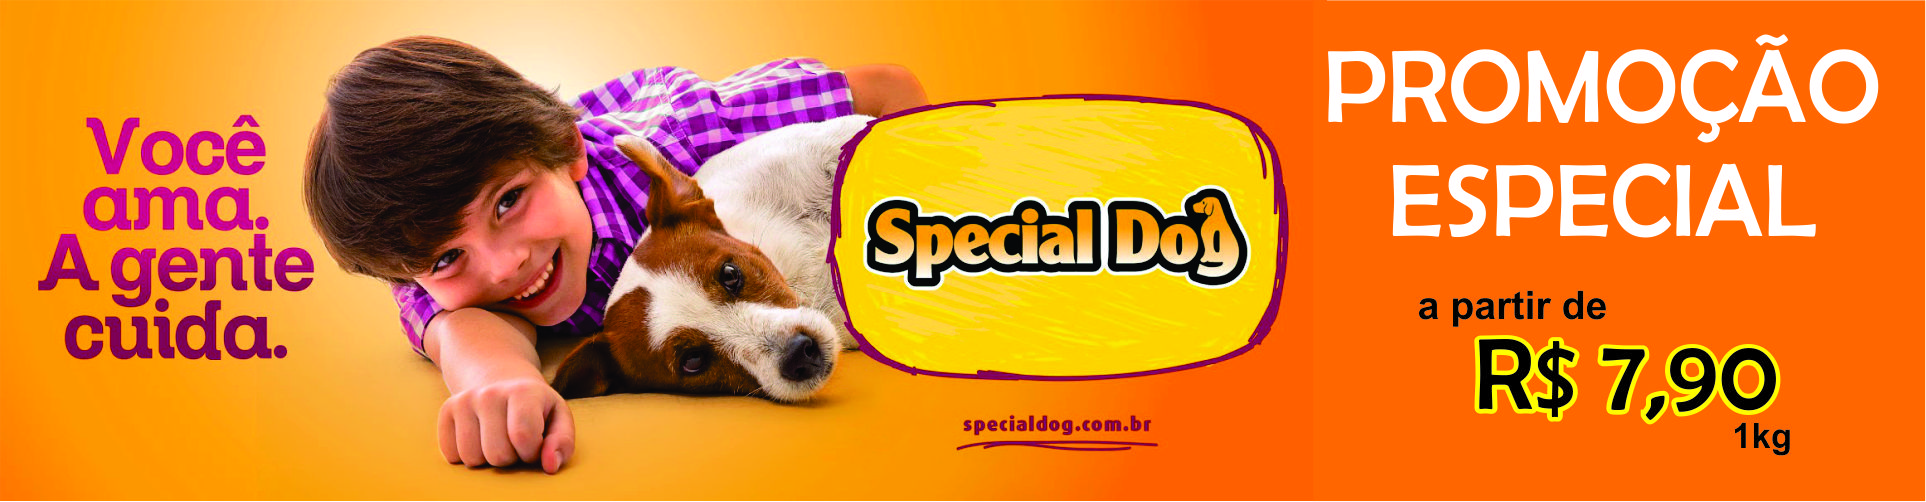 BANNER-SPECIAL-DOG-SITE